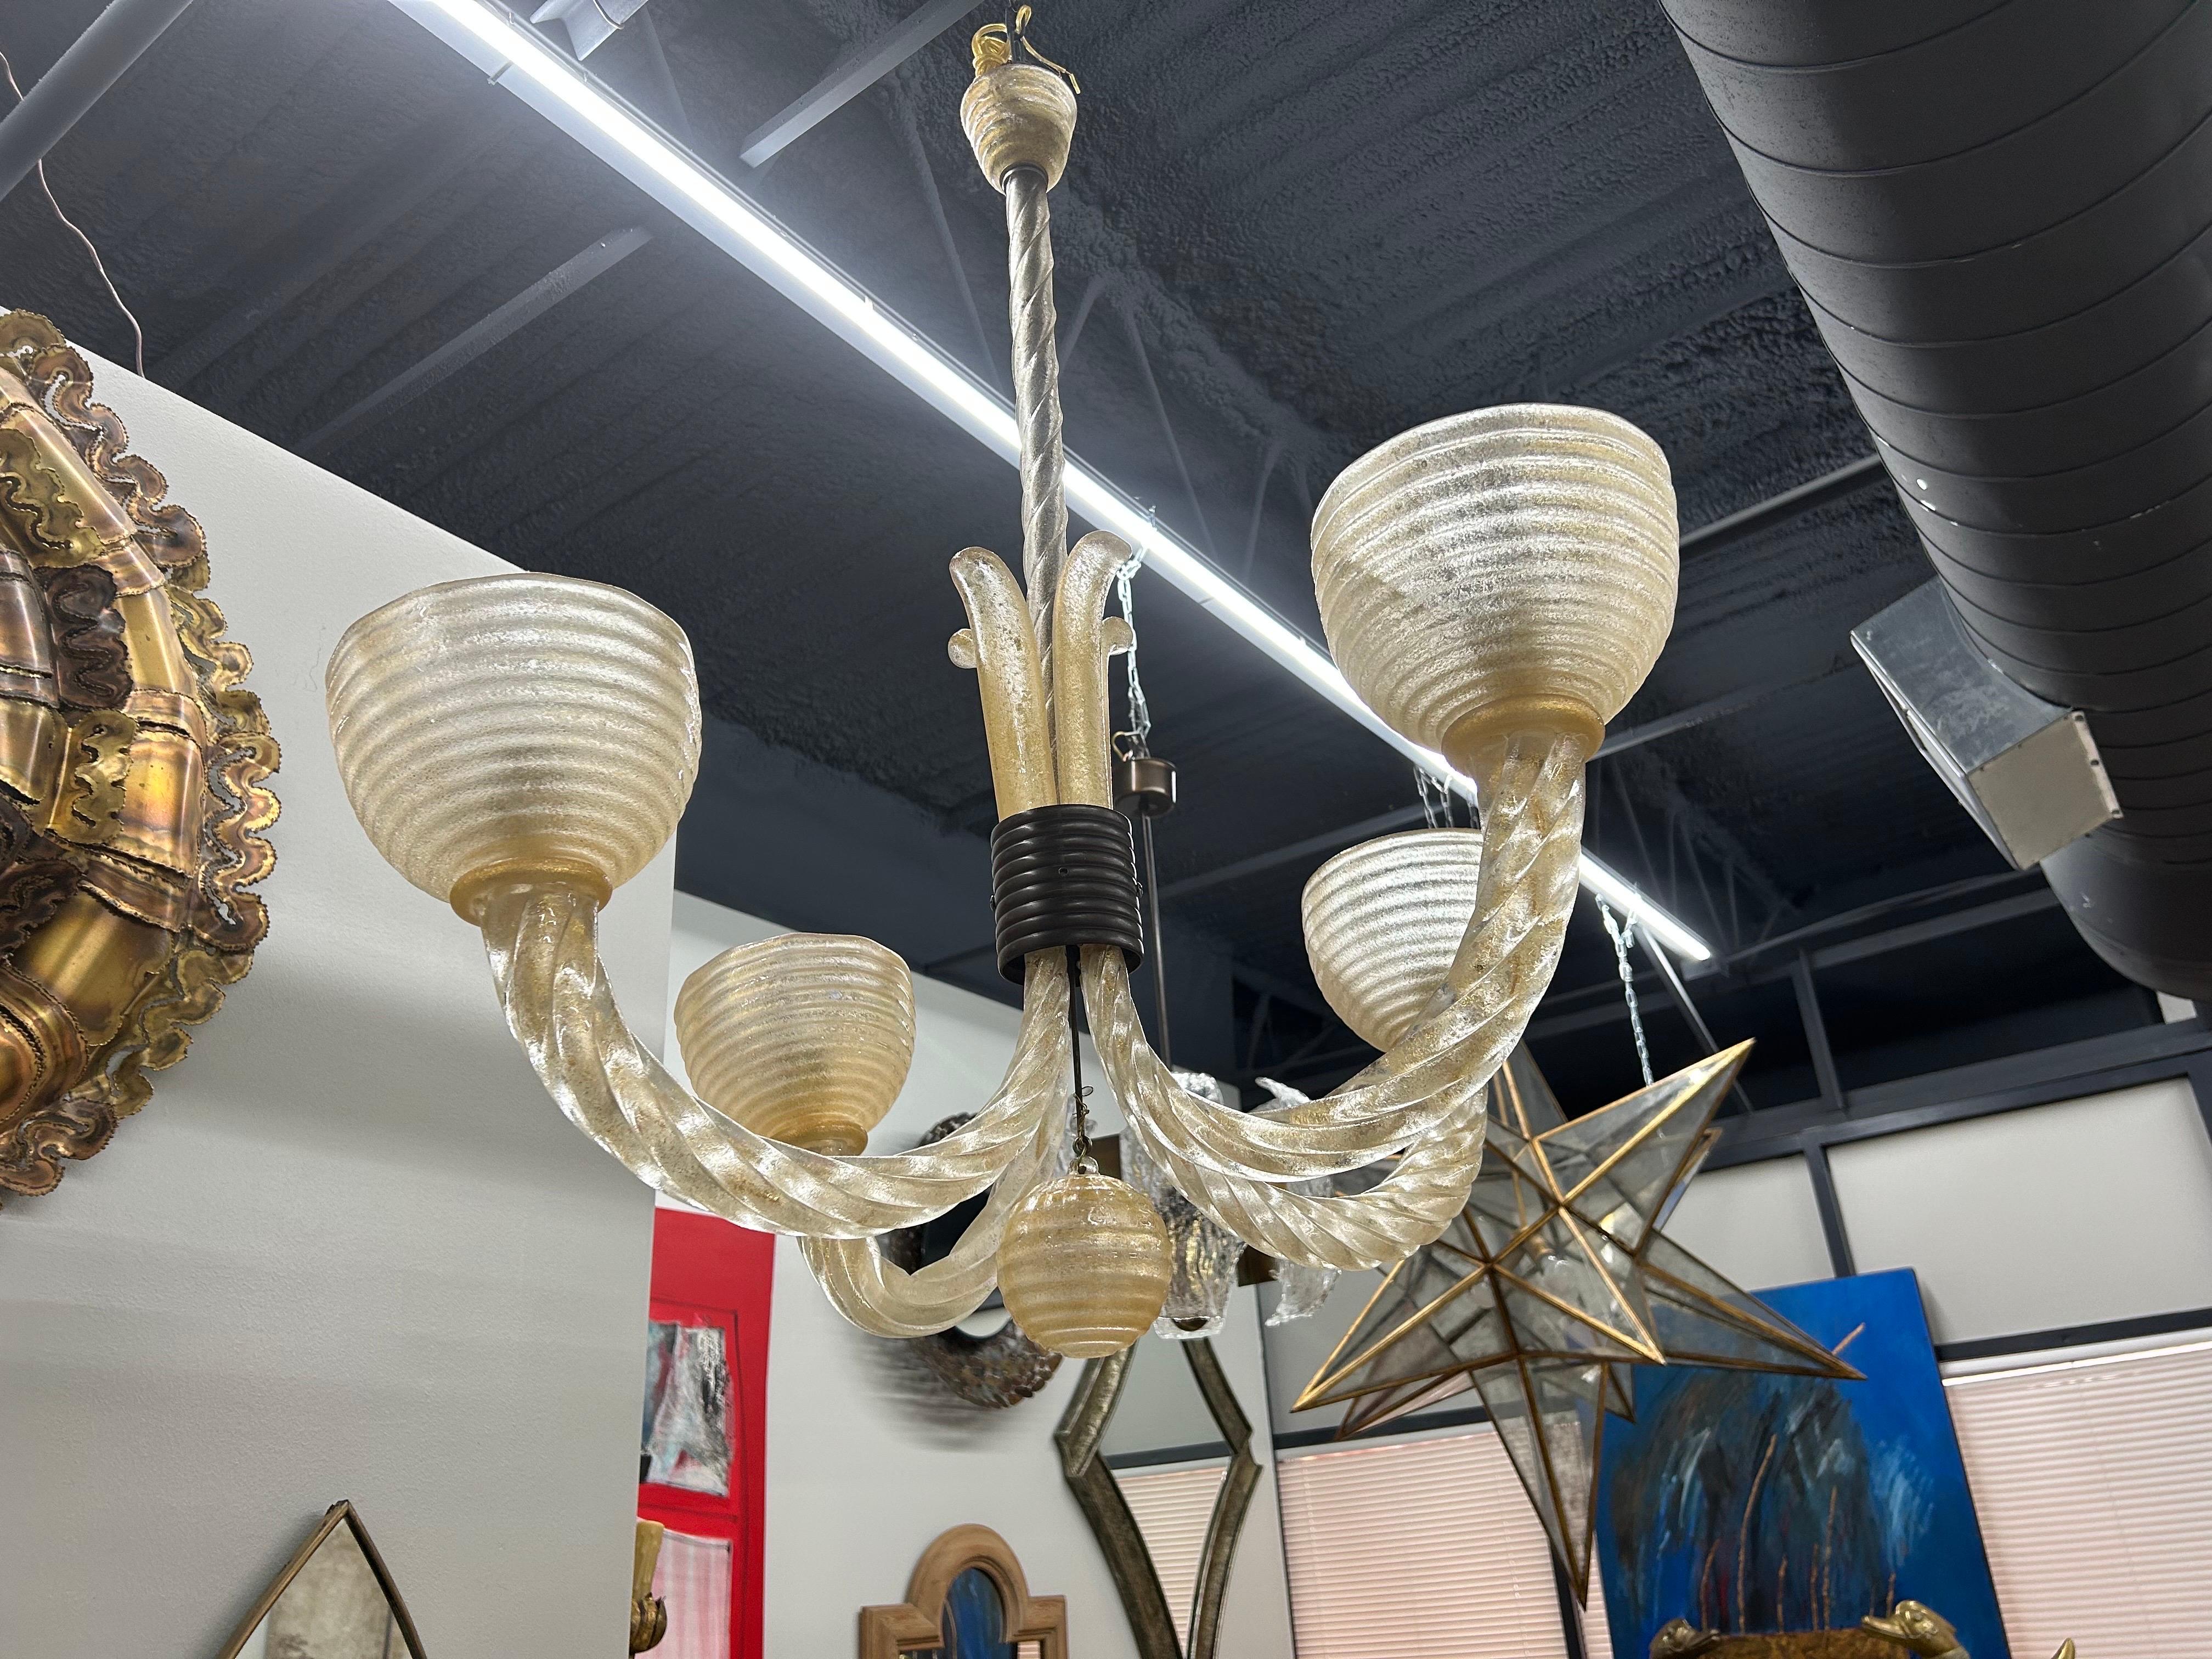 Murano Glass Chandelier By Barovier.
We offer a beautiful 4 light Murano glass chandelier designed by Ercole Barovier in the 1940's. This lovely Art Deco Murano chandelier has graceful twisted glass arms with striated glass shades. Our chandelier